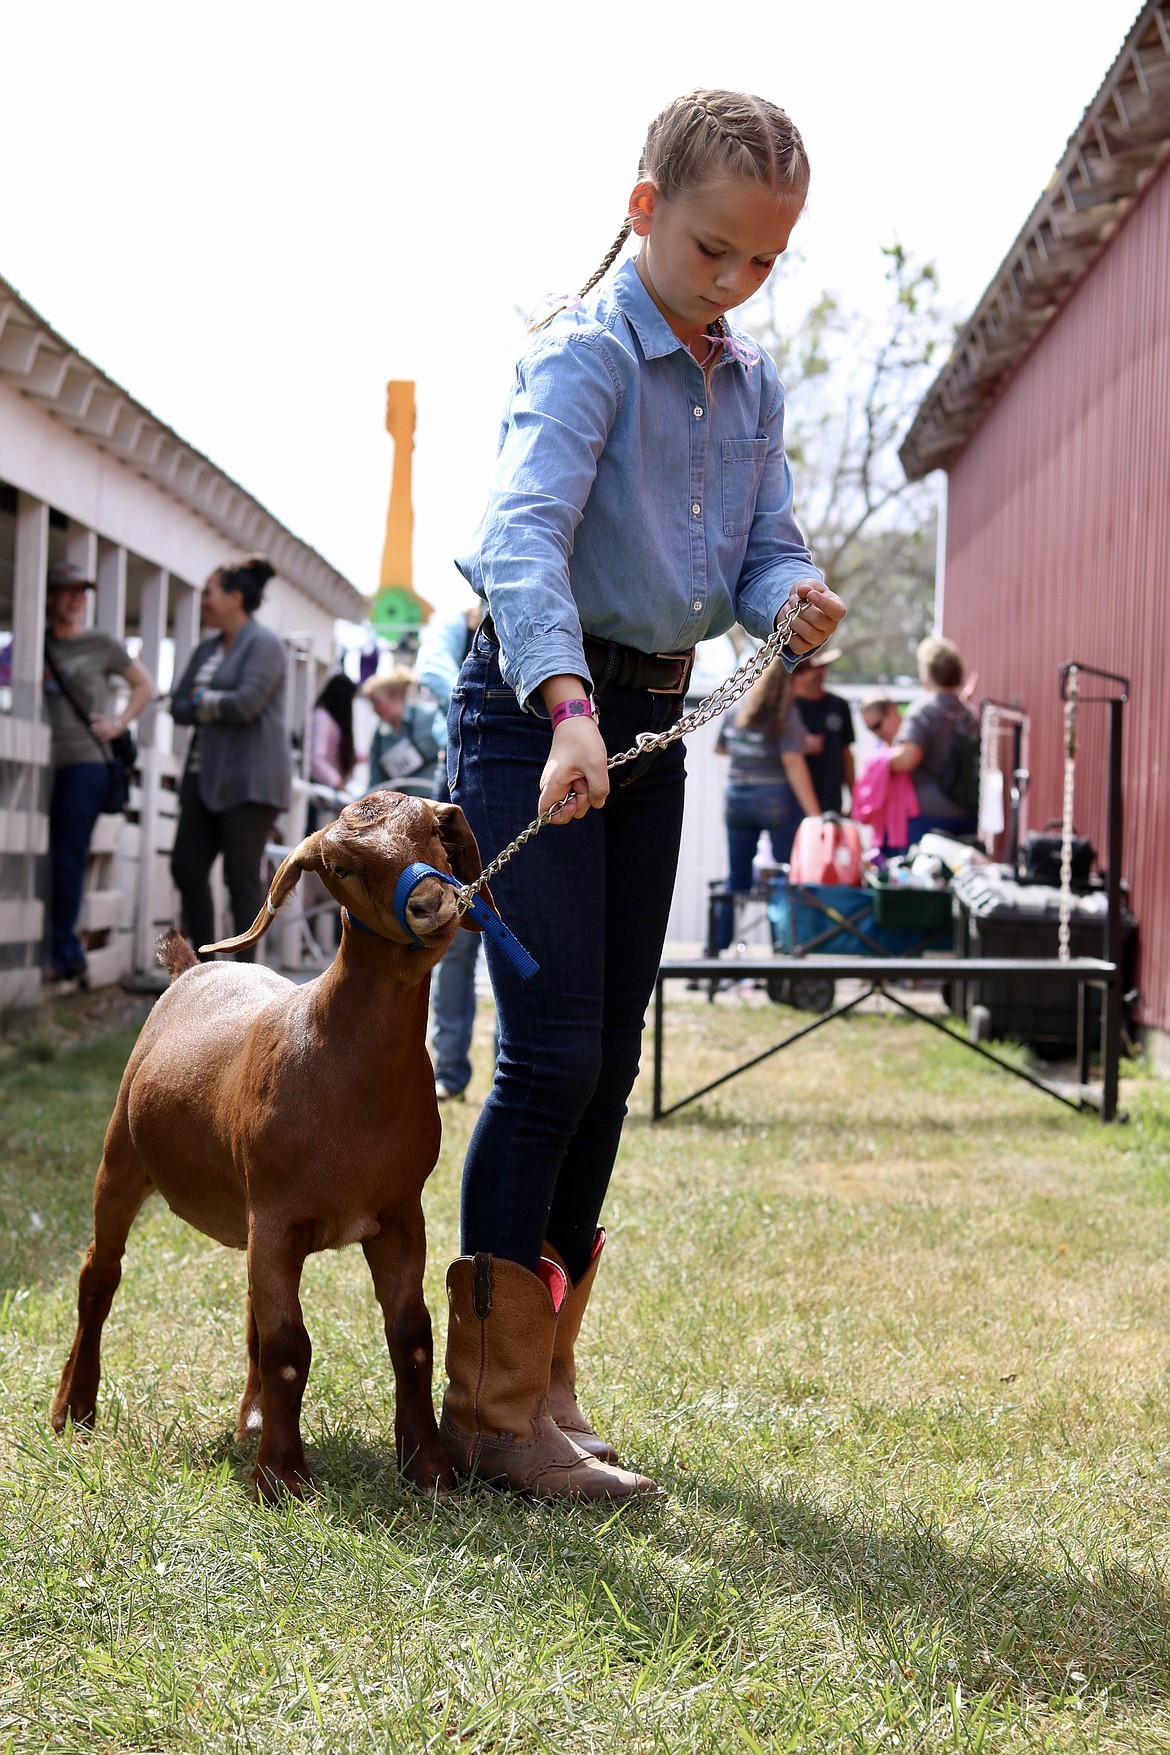 Jersey Larson, 11, practices walking her market goat, Darlin', for the market goat show at the North Idaho State Fair on Saturday morning. HANNAH NEFF/Press